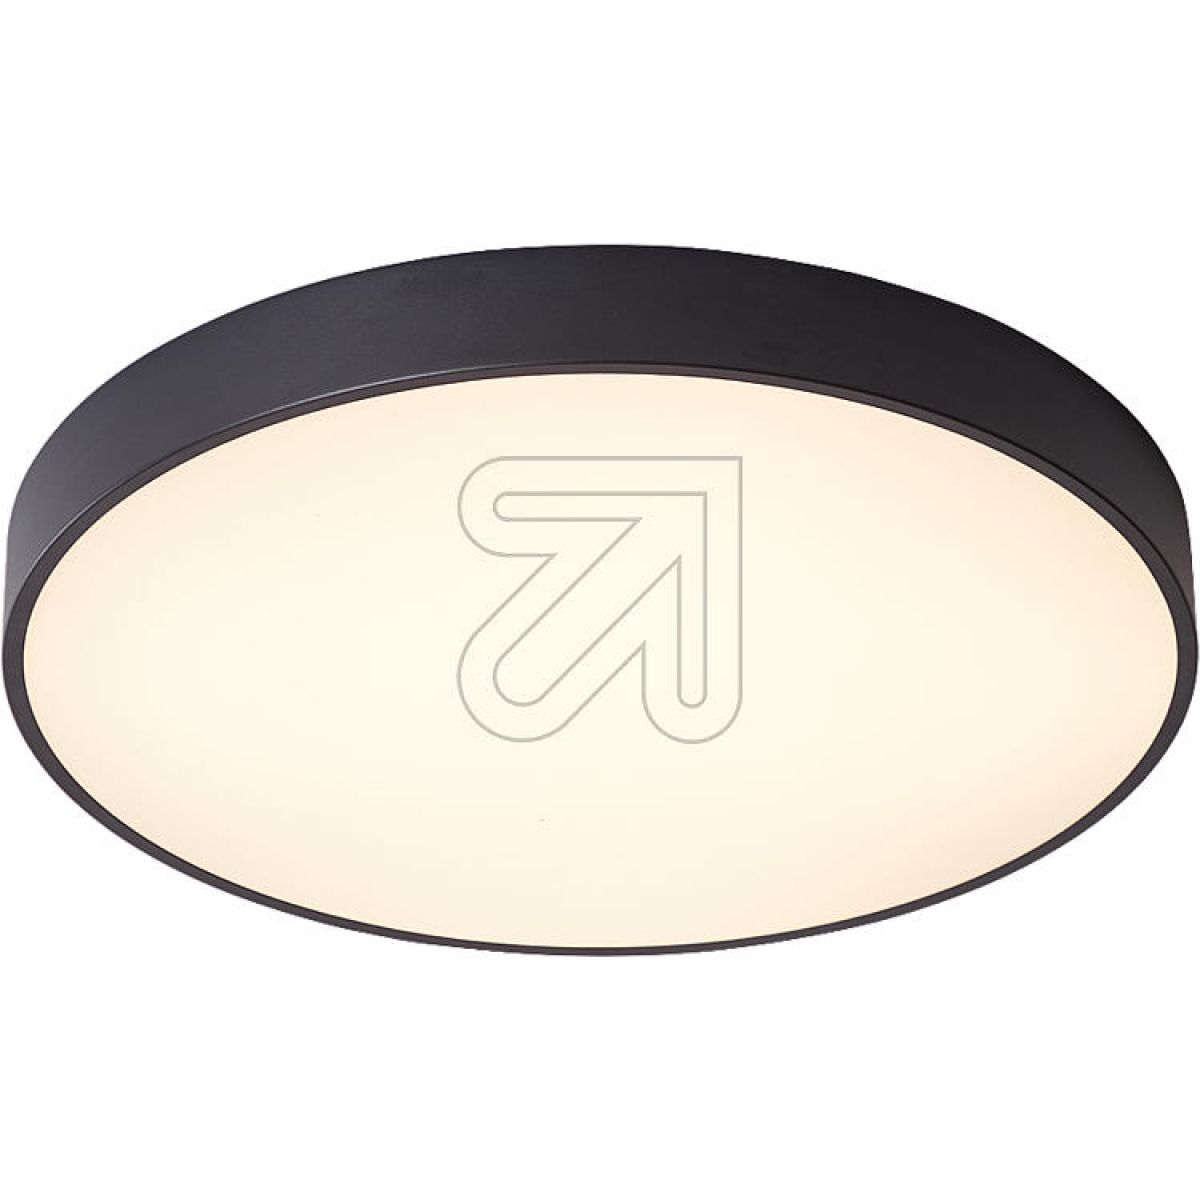 EVNLED surface-mounted light 2-Way Ø300mm, 24/6W CCT, black DALI, DUD300925Article-No: 695920